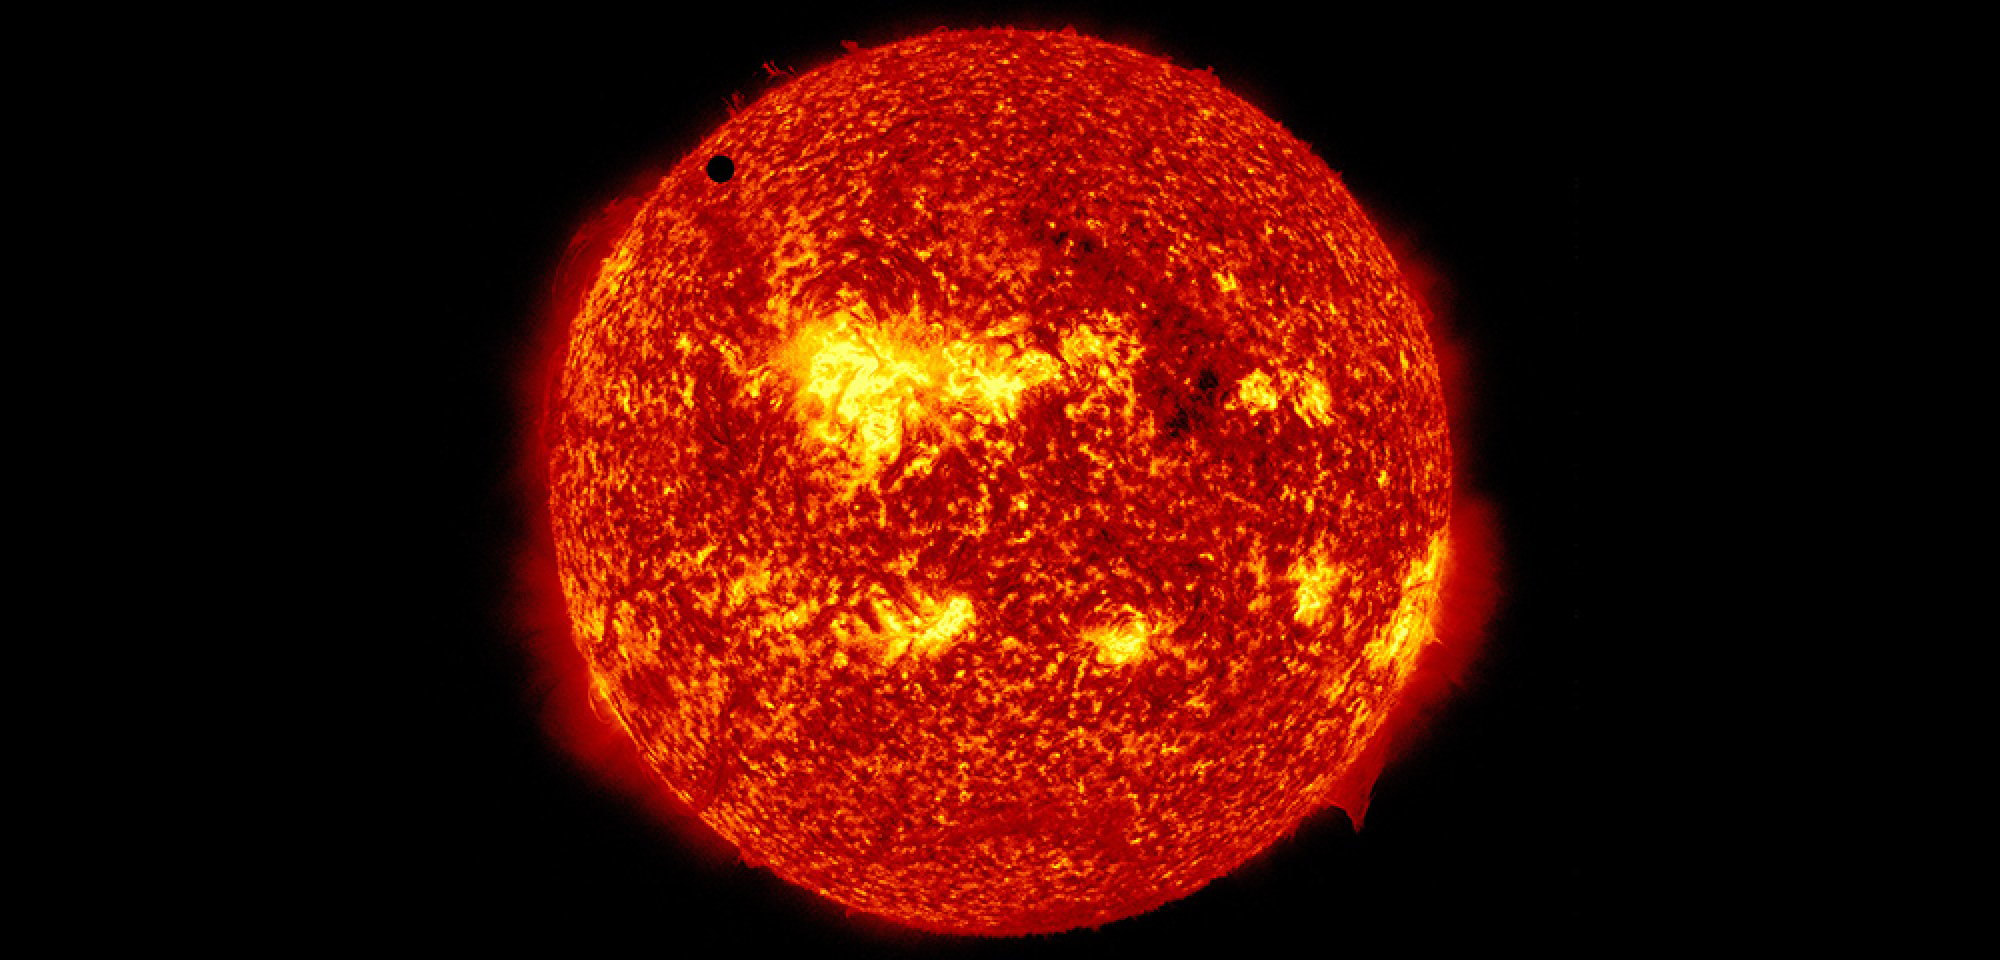 Venus visible as a tiny dot on the sun during the planet's transit.